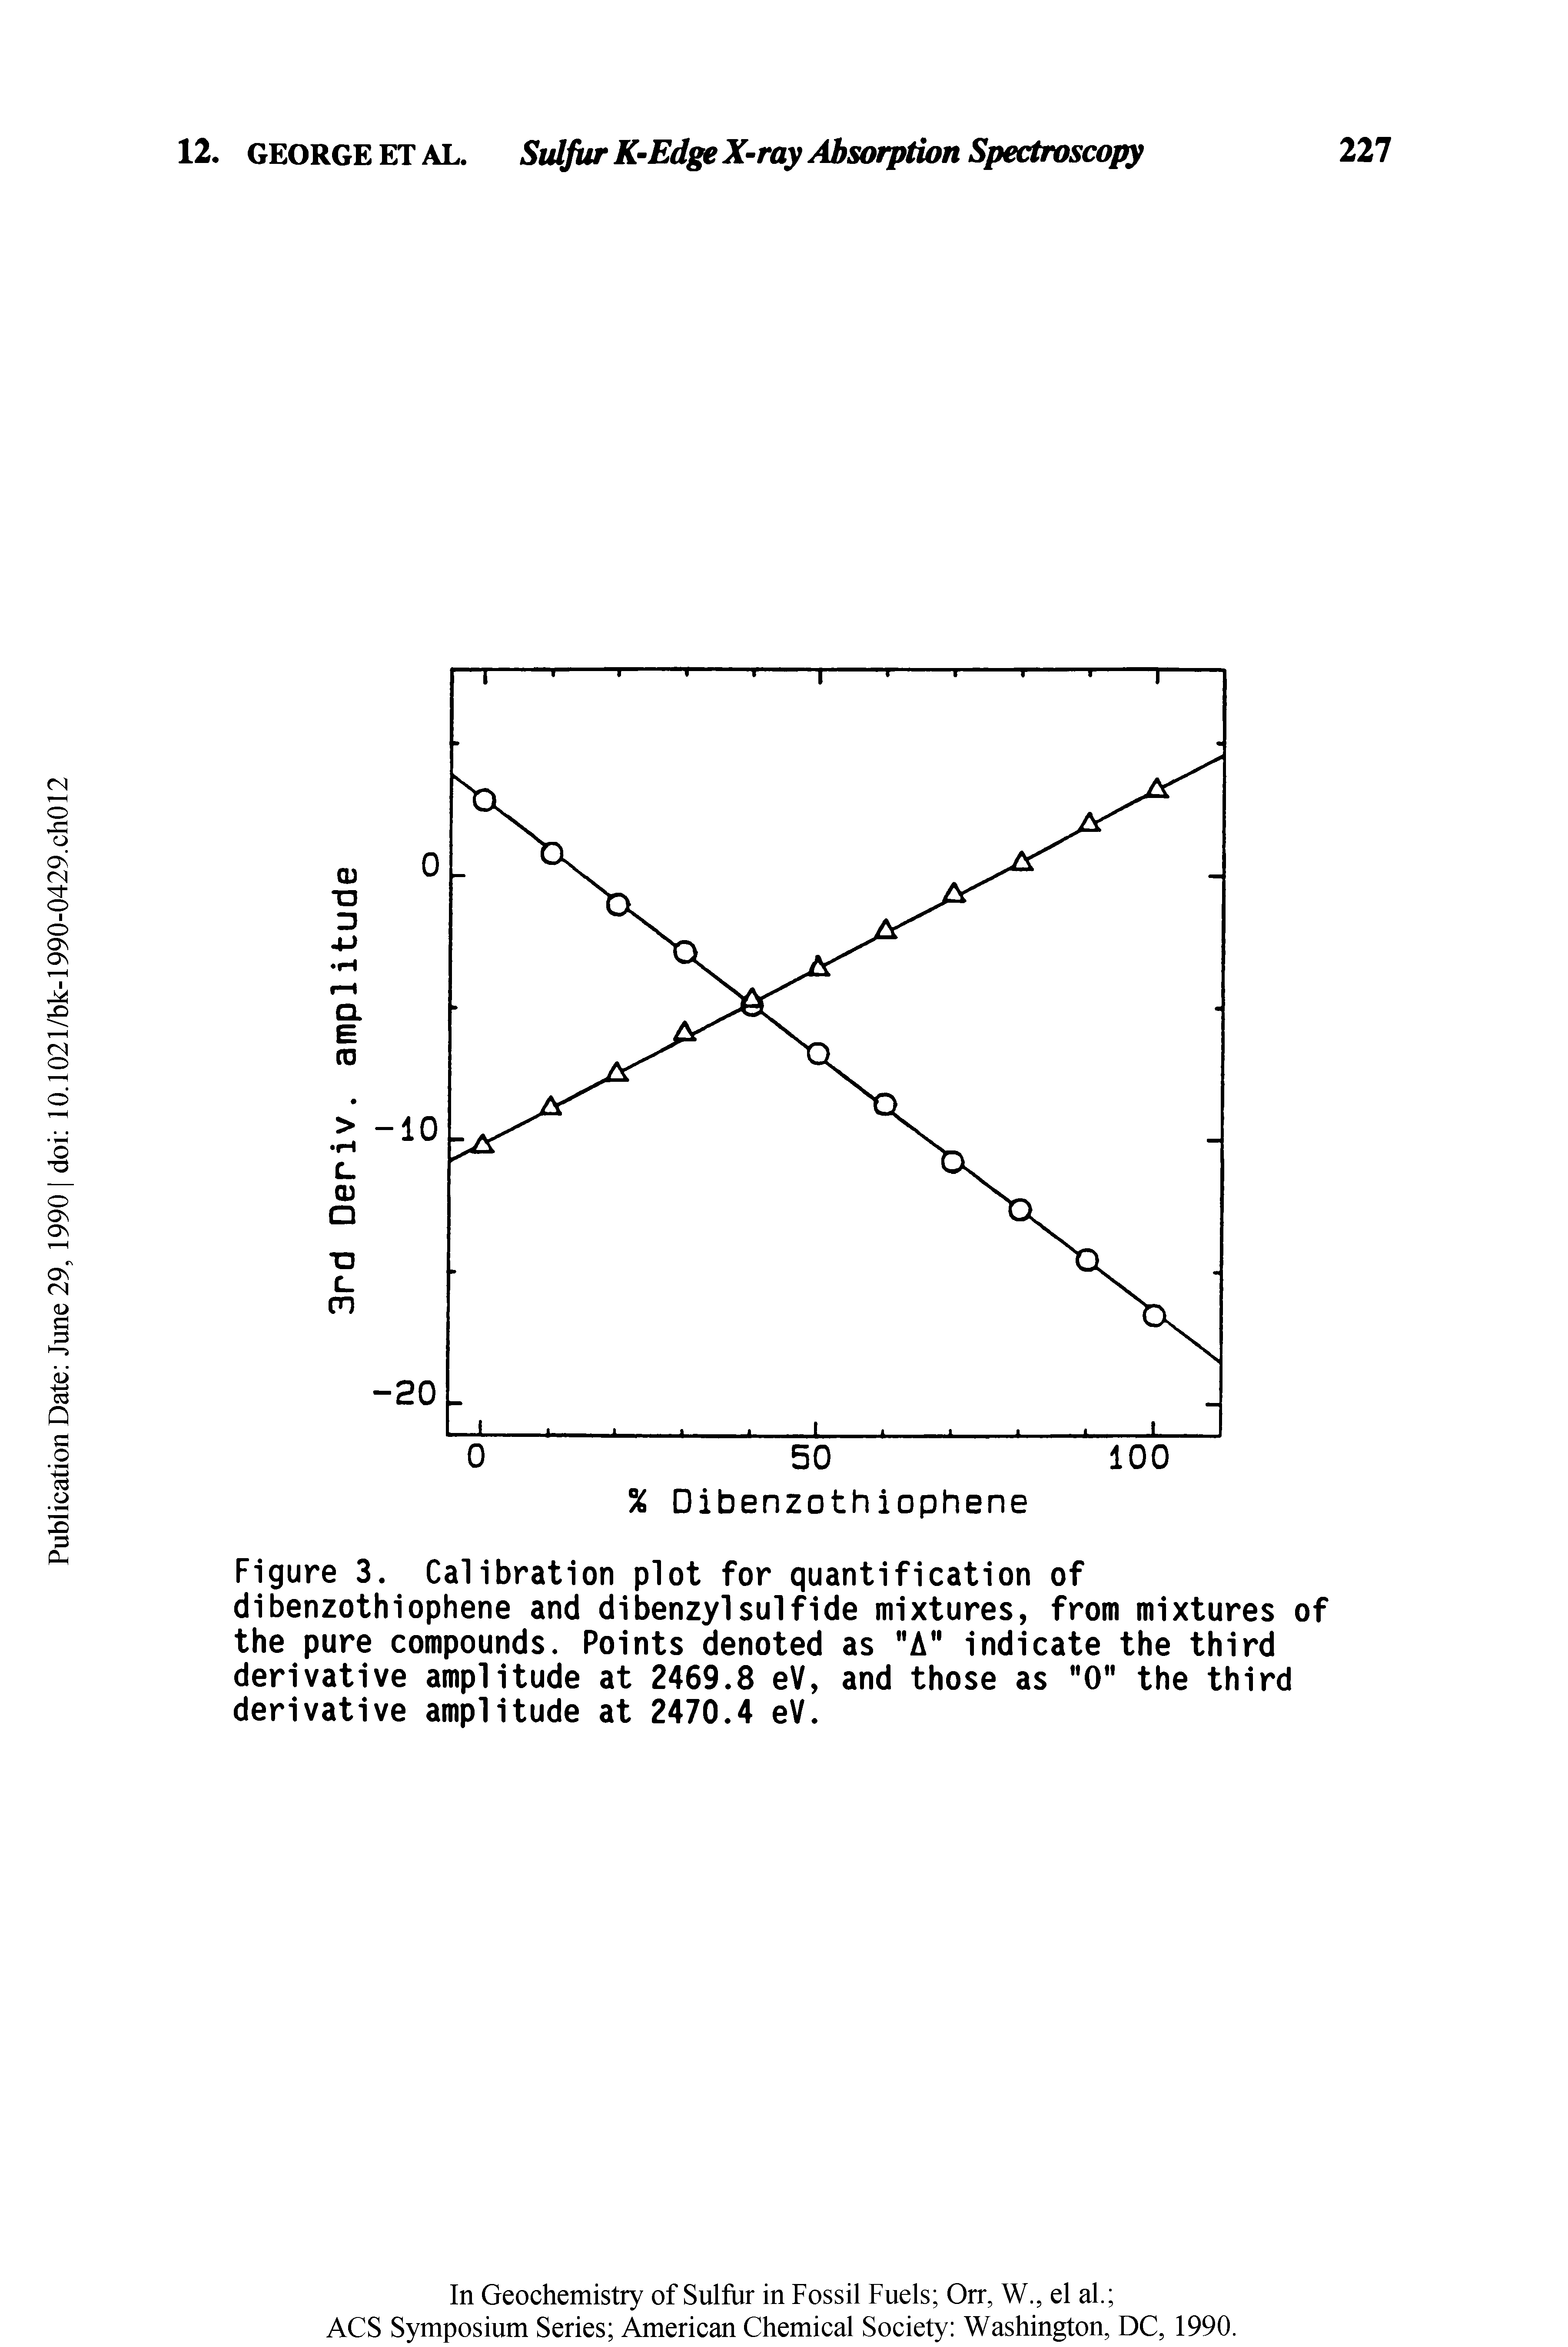 Figure 3. Calibration plot for quantification of dibenzothiophene and dibenzyl sulfide mixtures, from mixtures of the pure compounds. Points denoted as "A" indicate the third derivative amplitude at 2469.8 eV, and those as "0" the third derivative amplitude at 2470.4 eV.